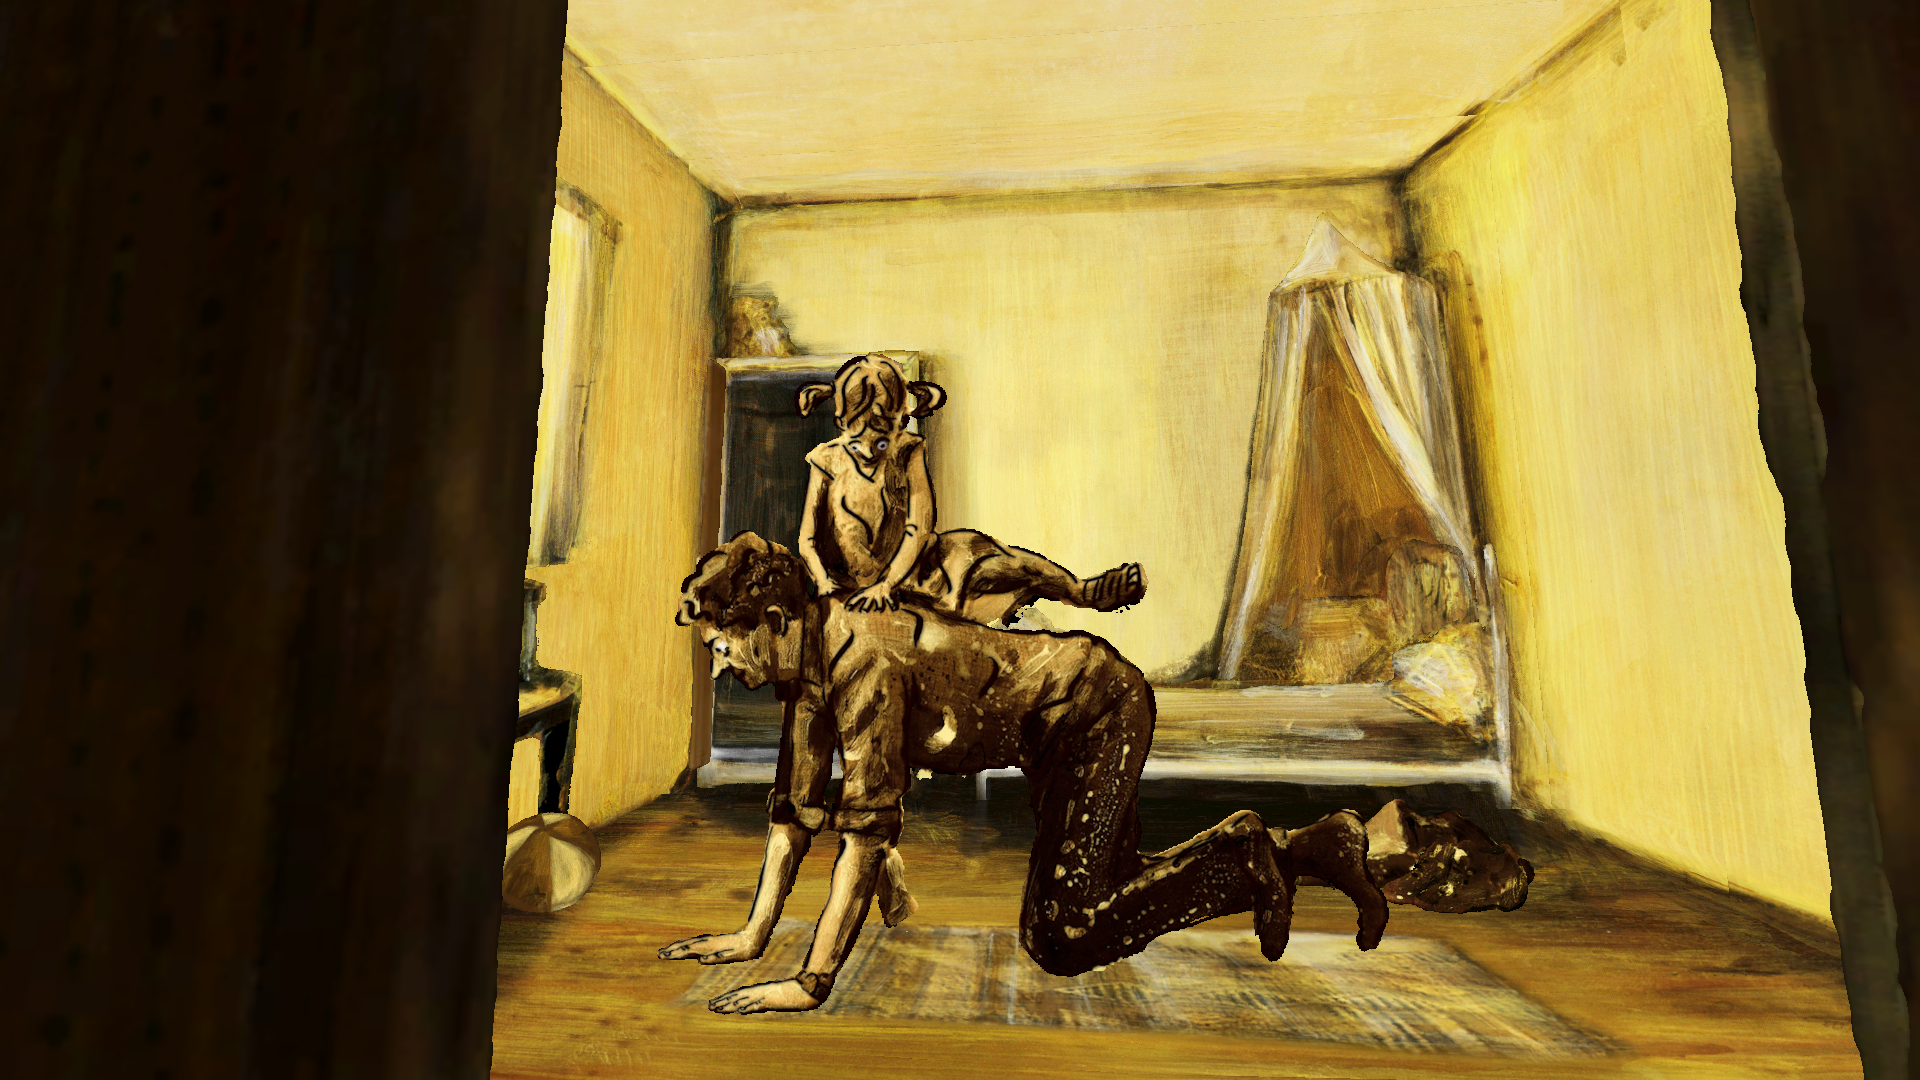 Screenshot from the Hangman at Home, with a man playing with his daughter.